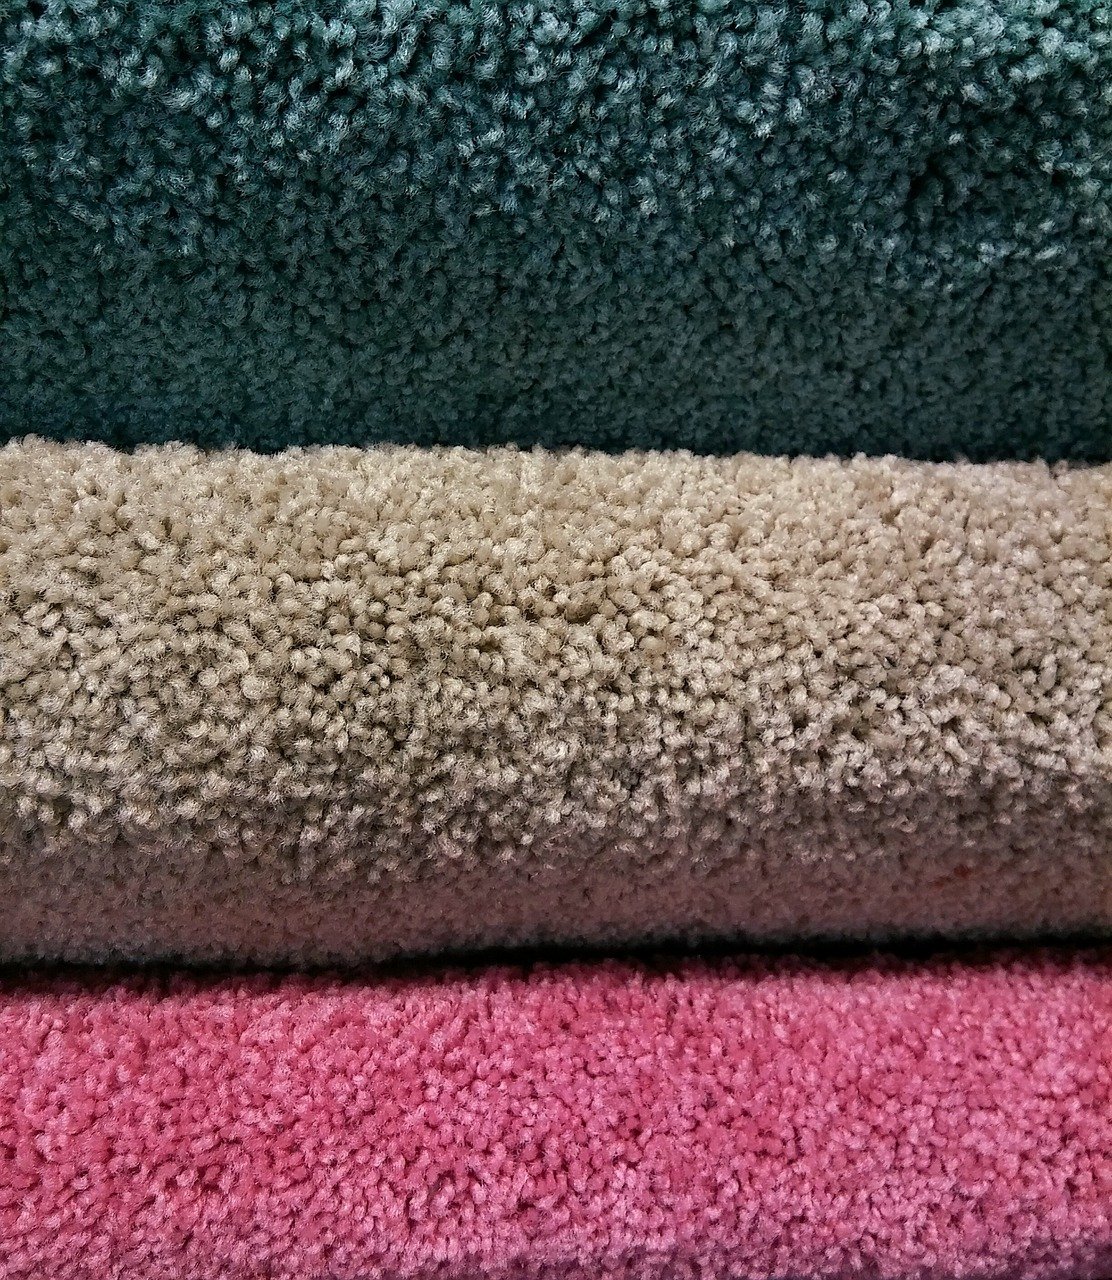 What Are The Advantages Of Using Boating Rugs?